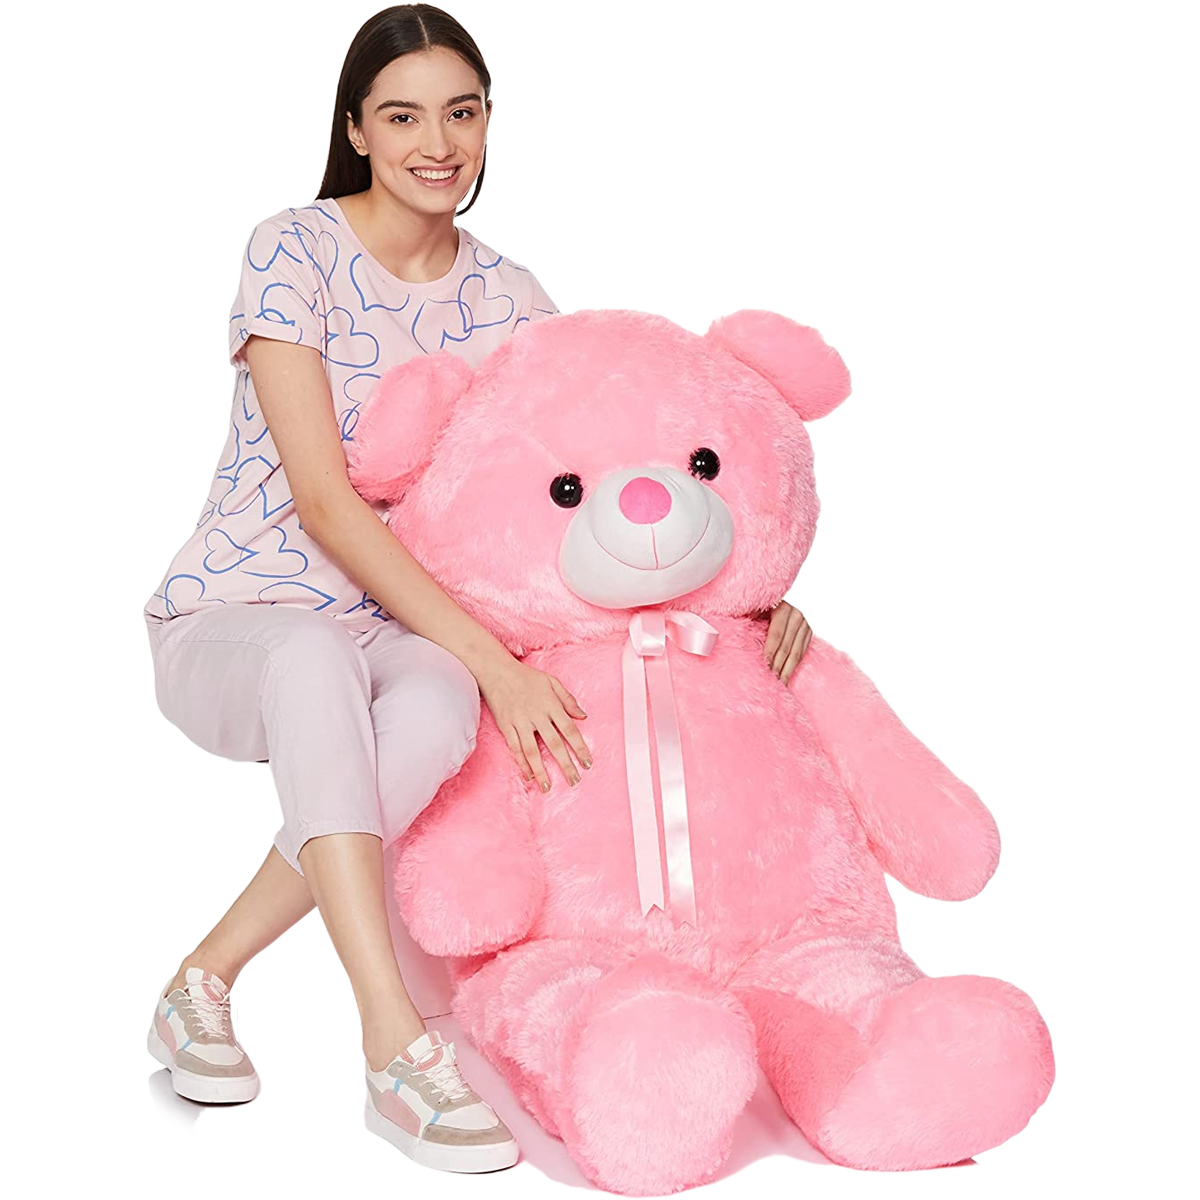 Girl with Teddy Bear Transparent Image